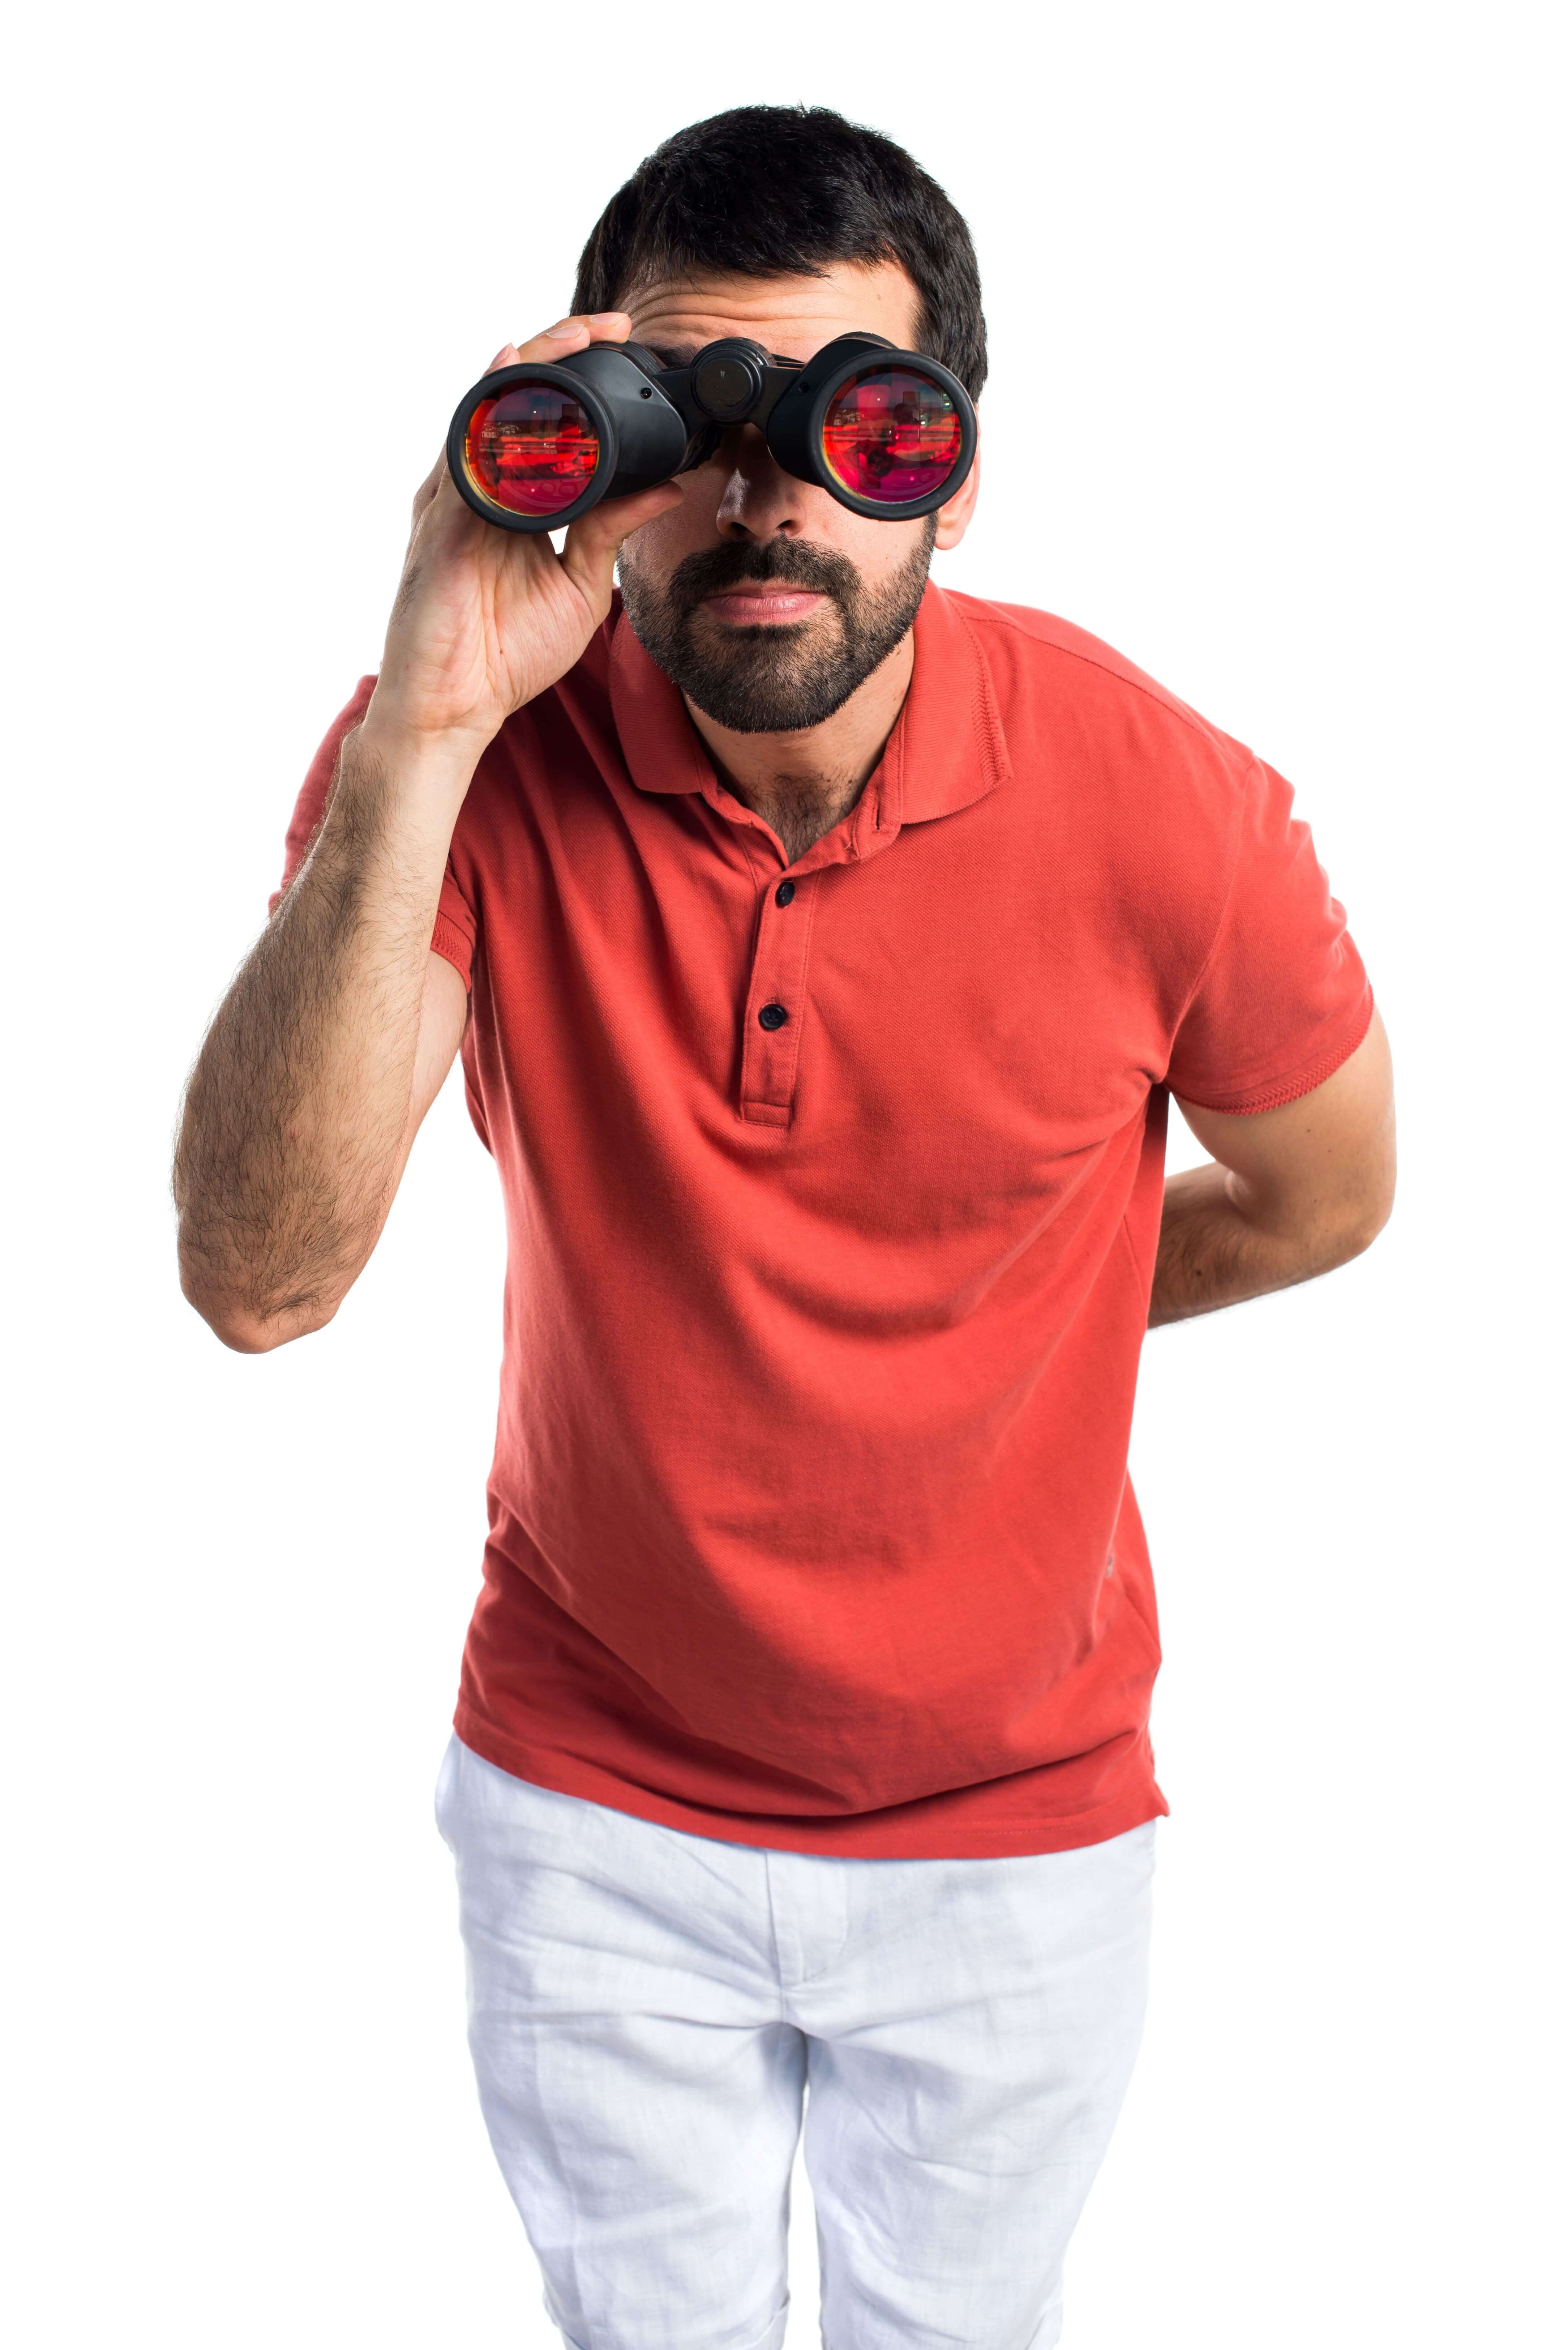 A man in a red shirt uses binoculars to view something in the distance.